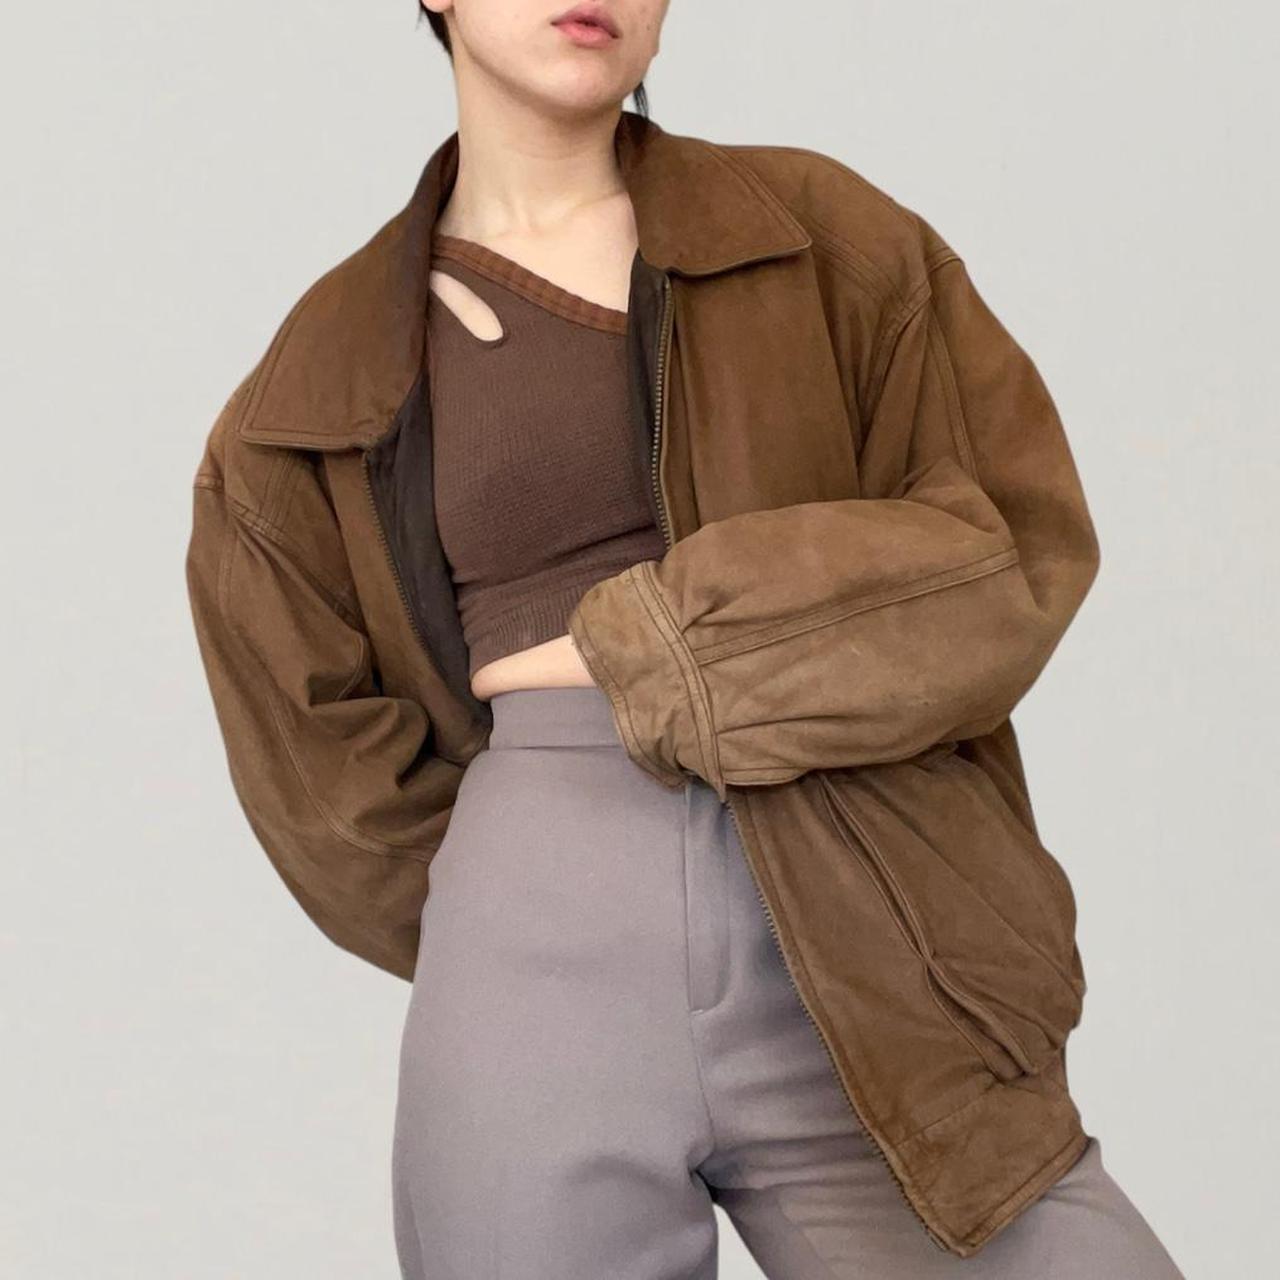 Members Only Women's Brown and Tan Jacket (2)